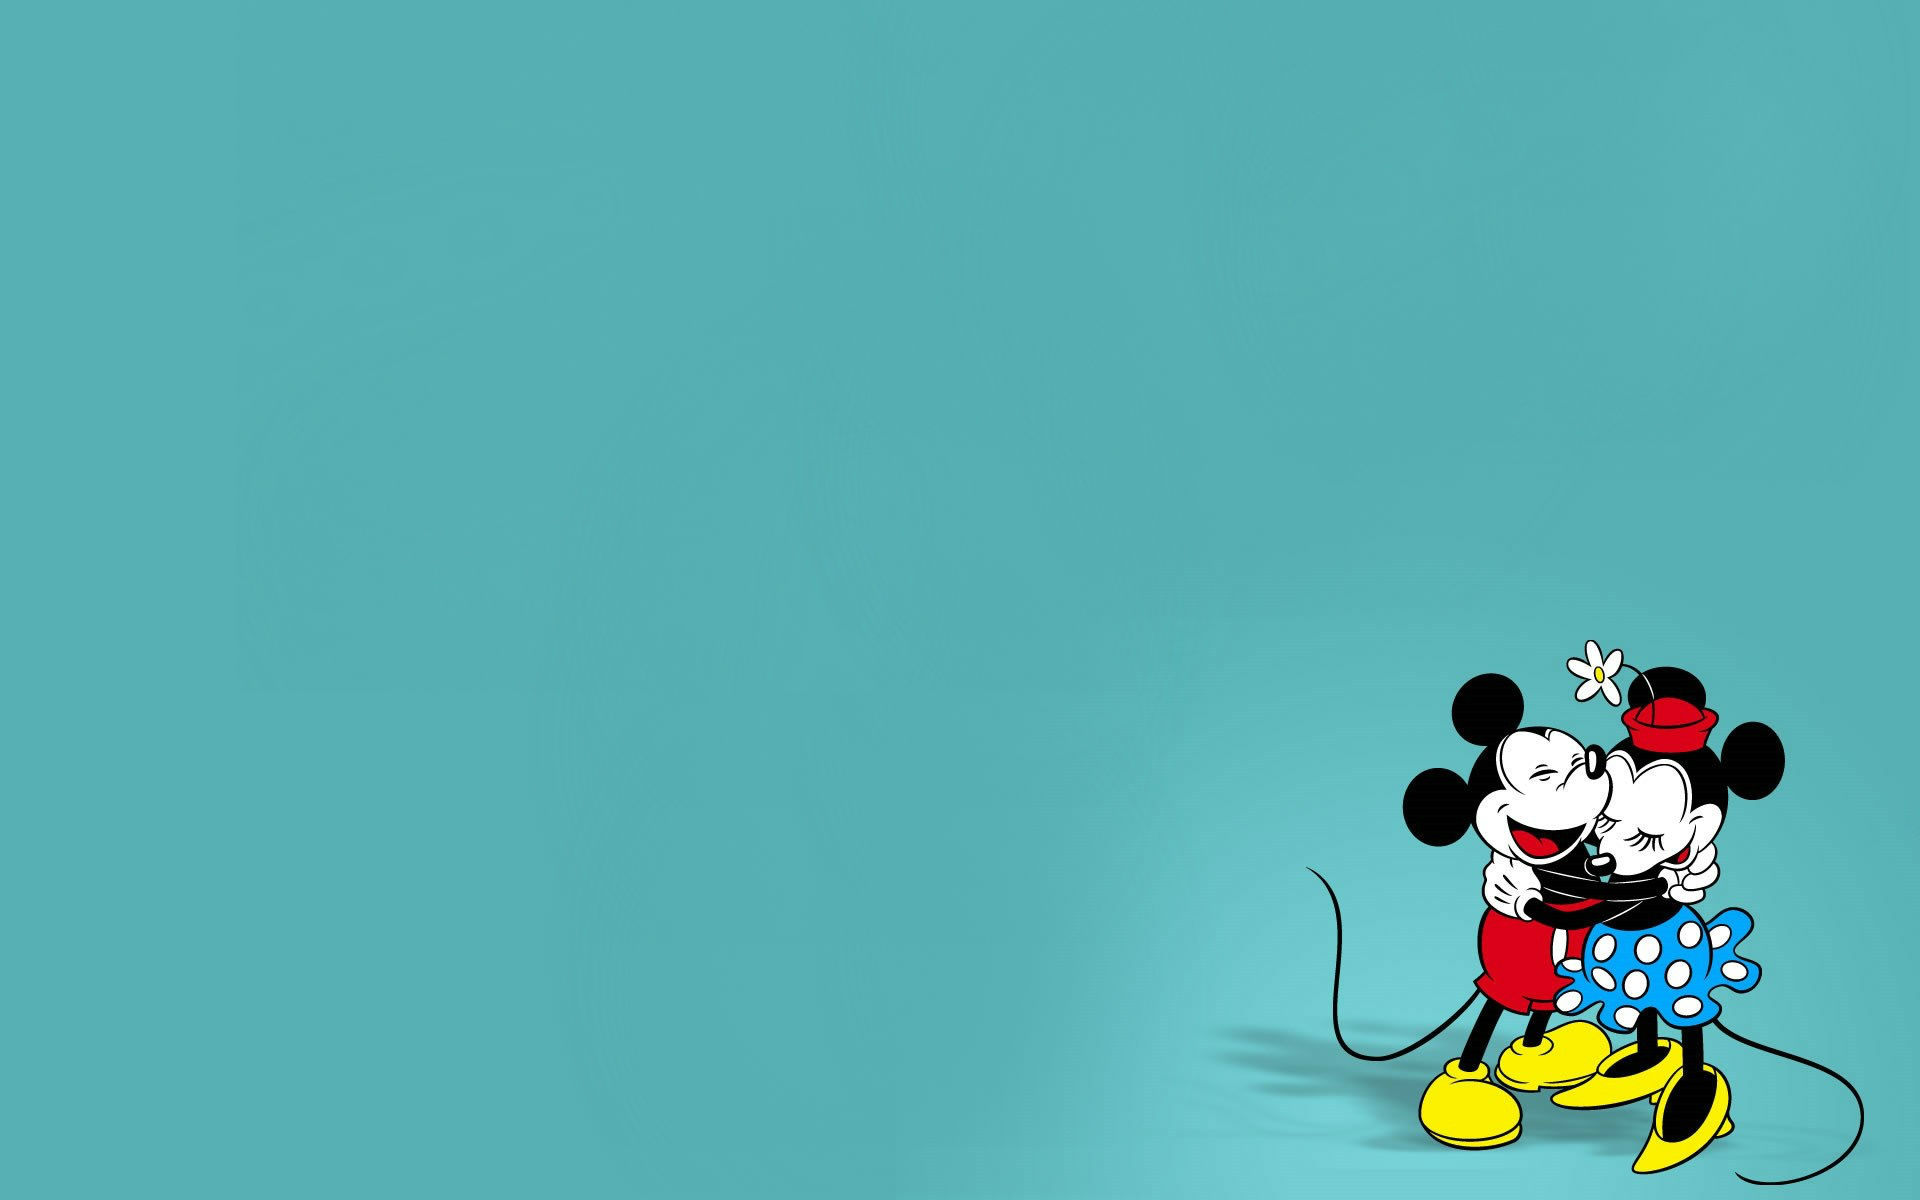 Mickey And Minnie Mouse Cartoon